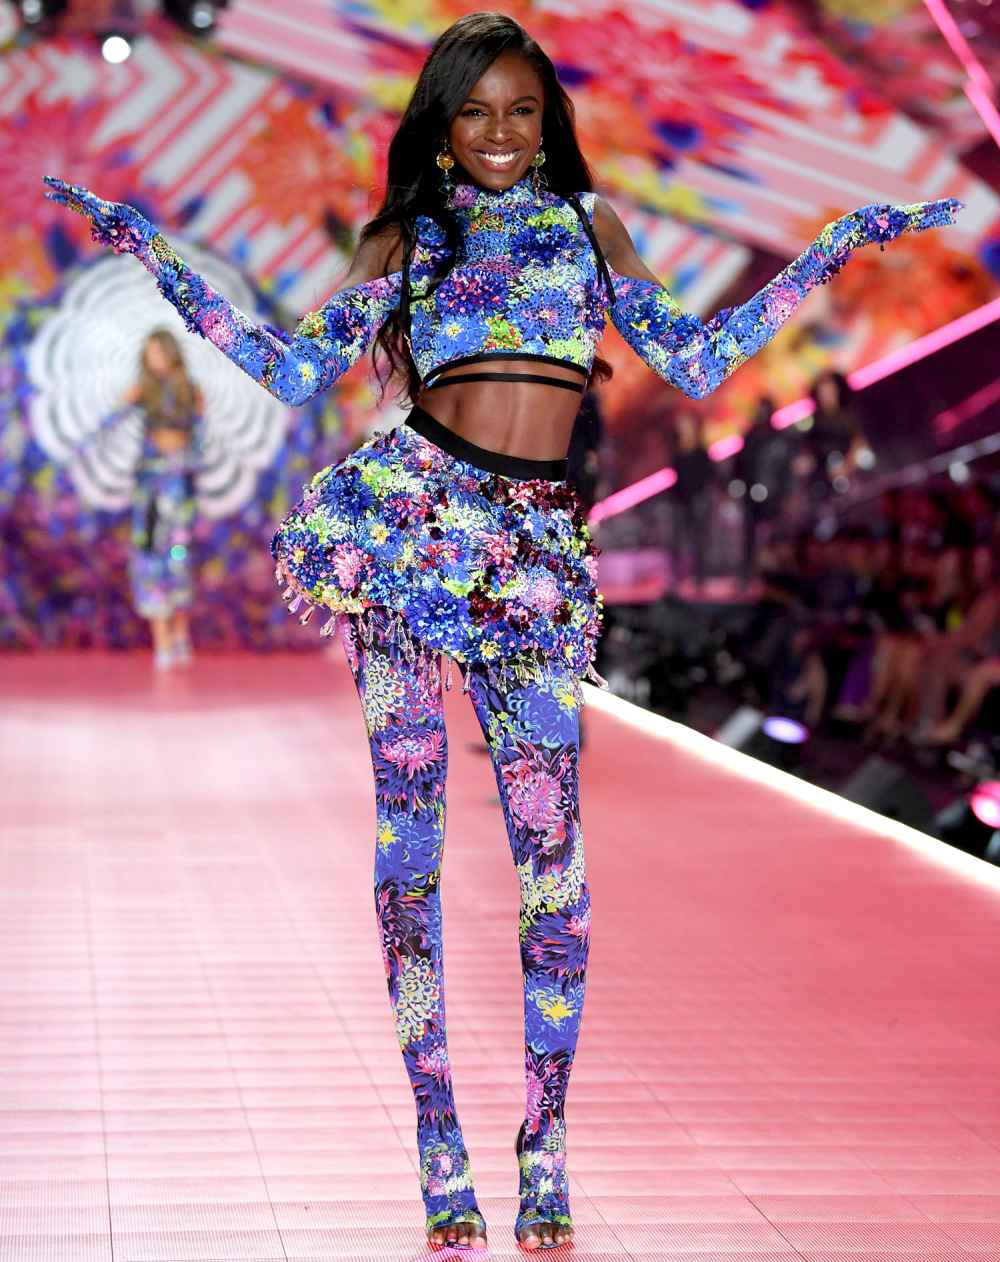 Leomie Anderson: Facts About the Newest Victoria's Secret Angel